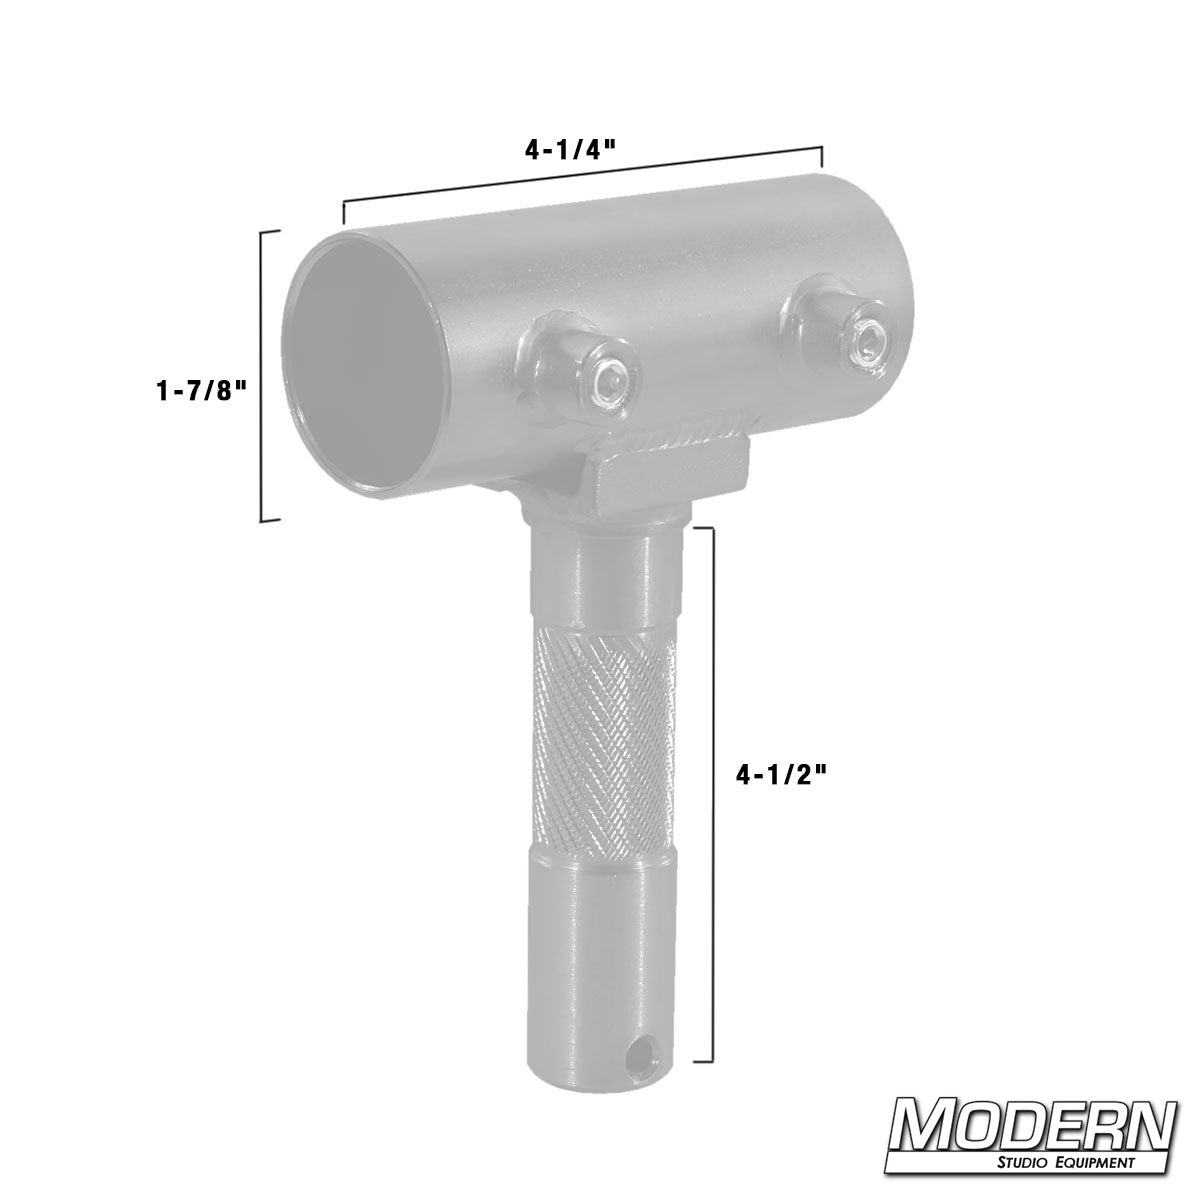 Slider with Junior Male for 1-1/4" Speed-Rail®